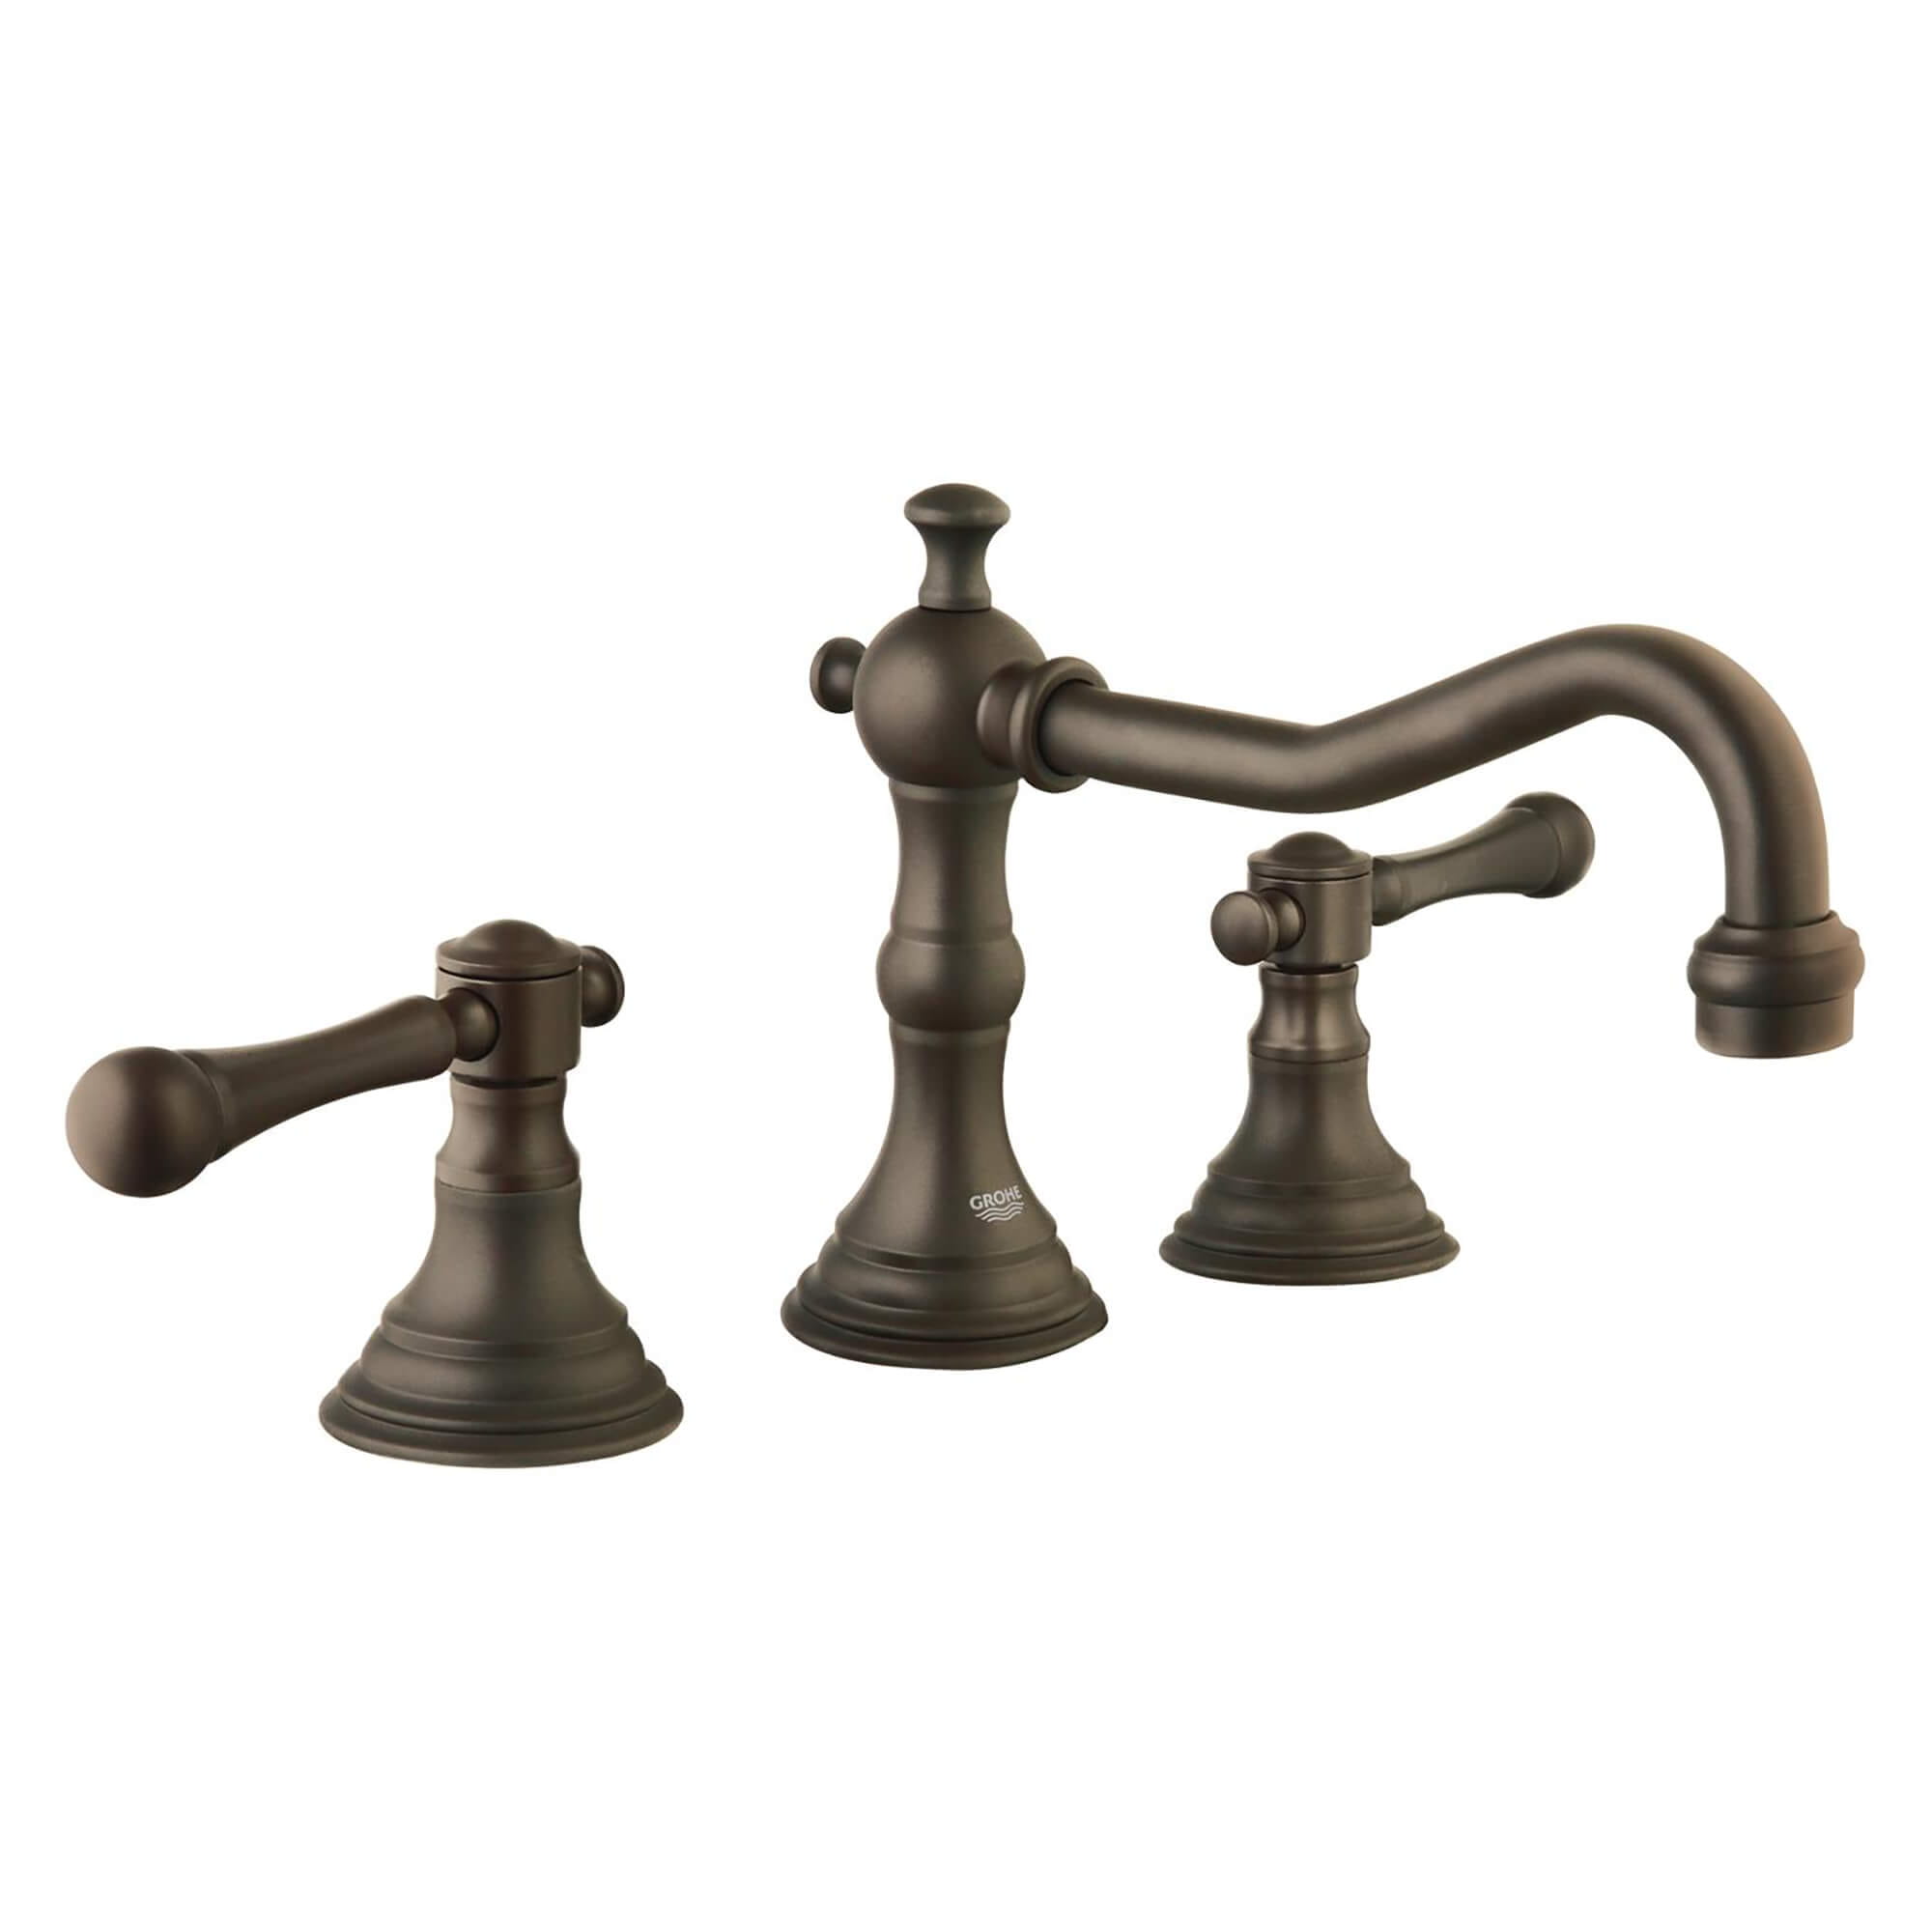 Bridgeford 8 in Widespread 2 Handle 3 Hole Bathroom Faucet GROHE OIL RUBBED BRONZE